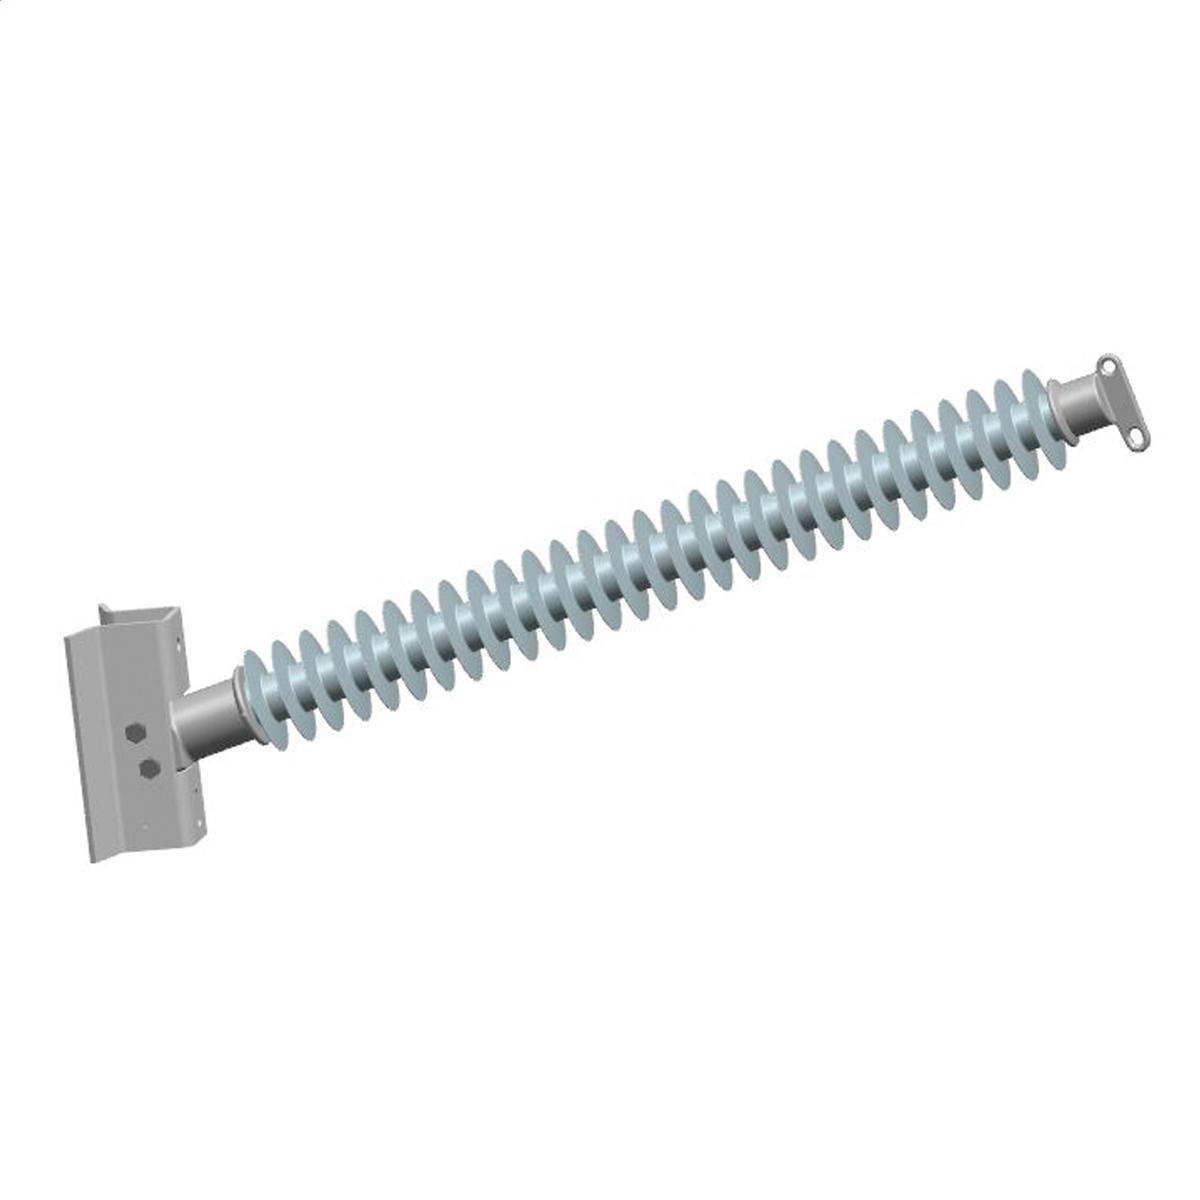 Hubbell P250029S0080 2.5" Line Post, Std. Leak, 2 Hole blade, Steel flat base 8x13/12" CL 7/8" bolts  ; Made from hydrophobic silicone polymer ; 